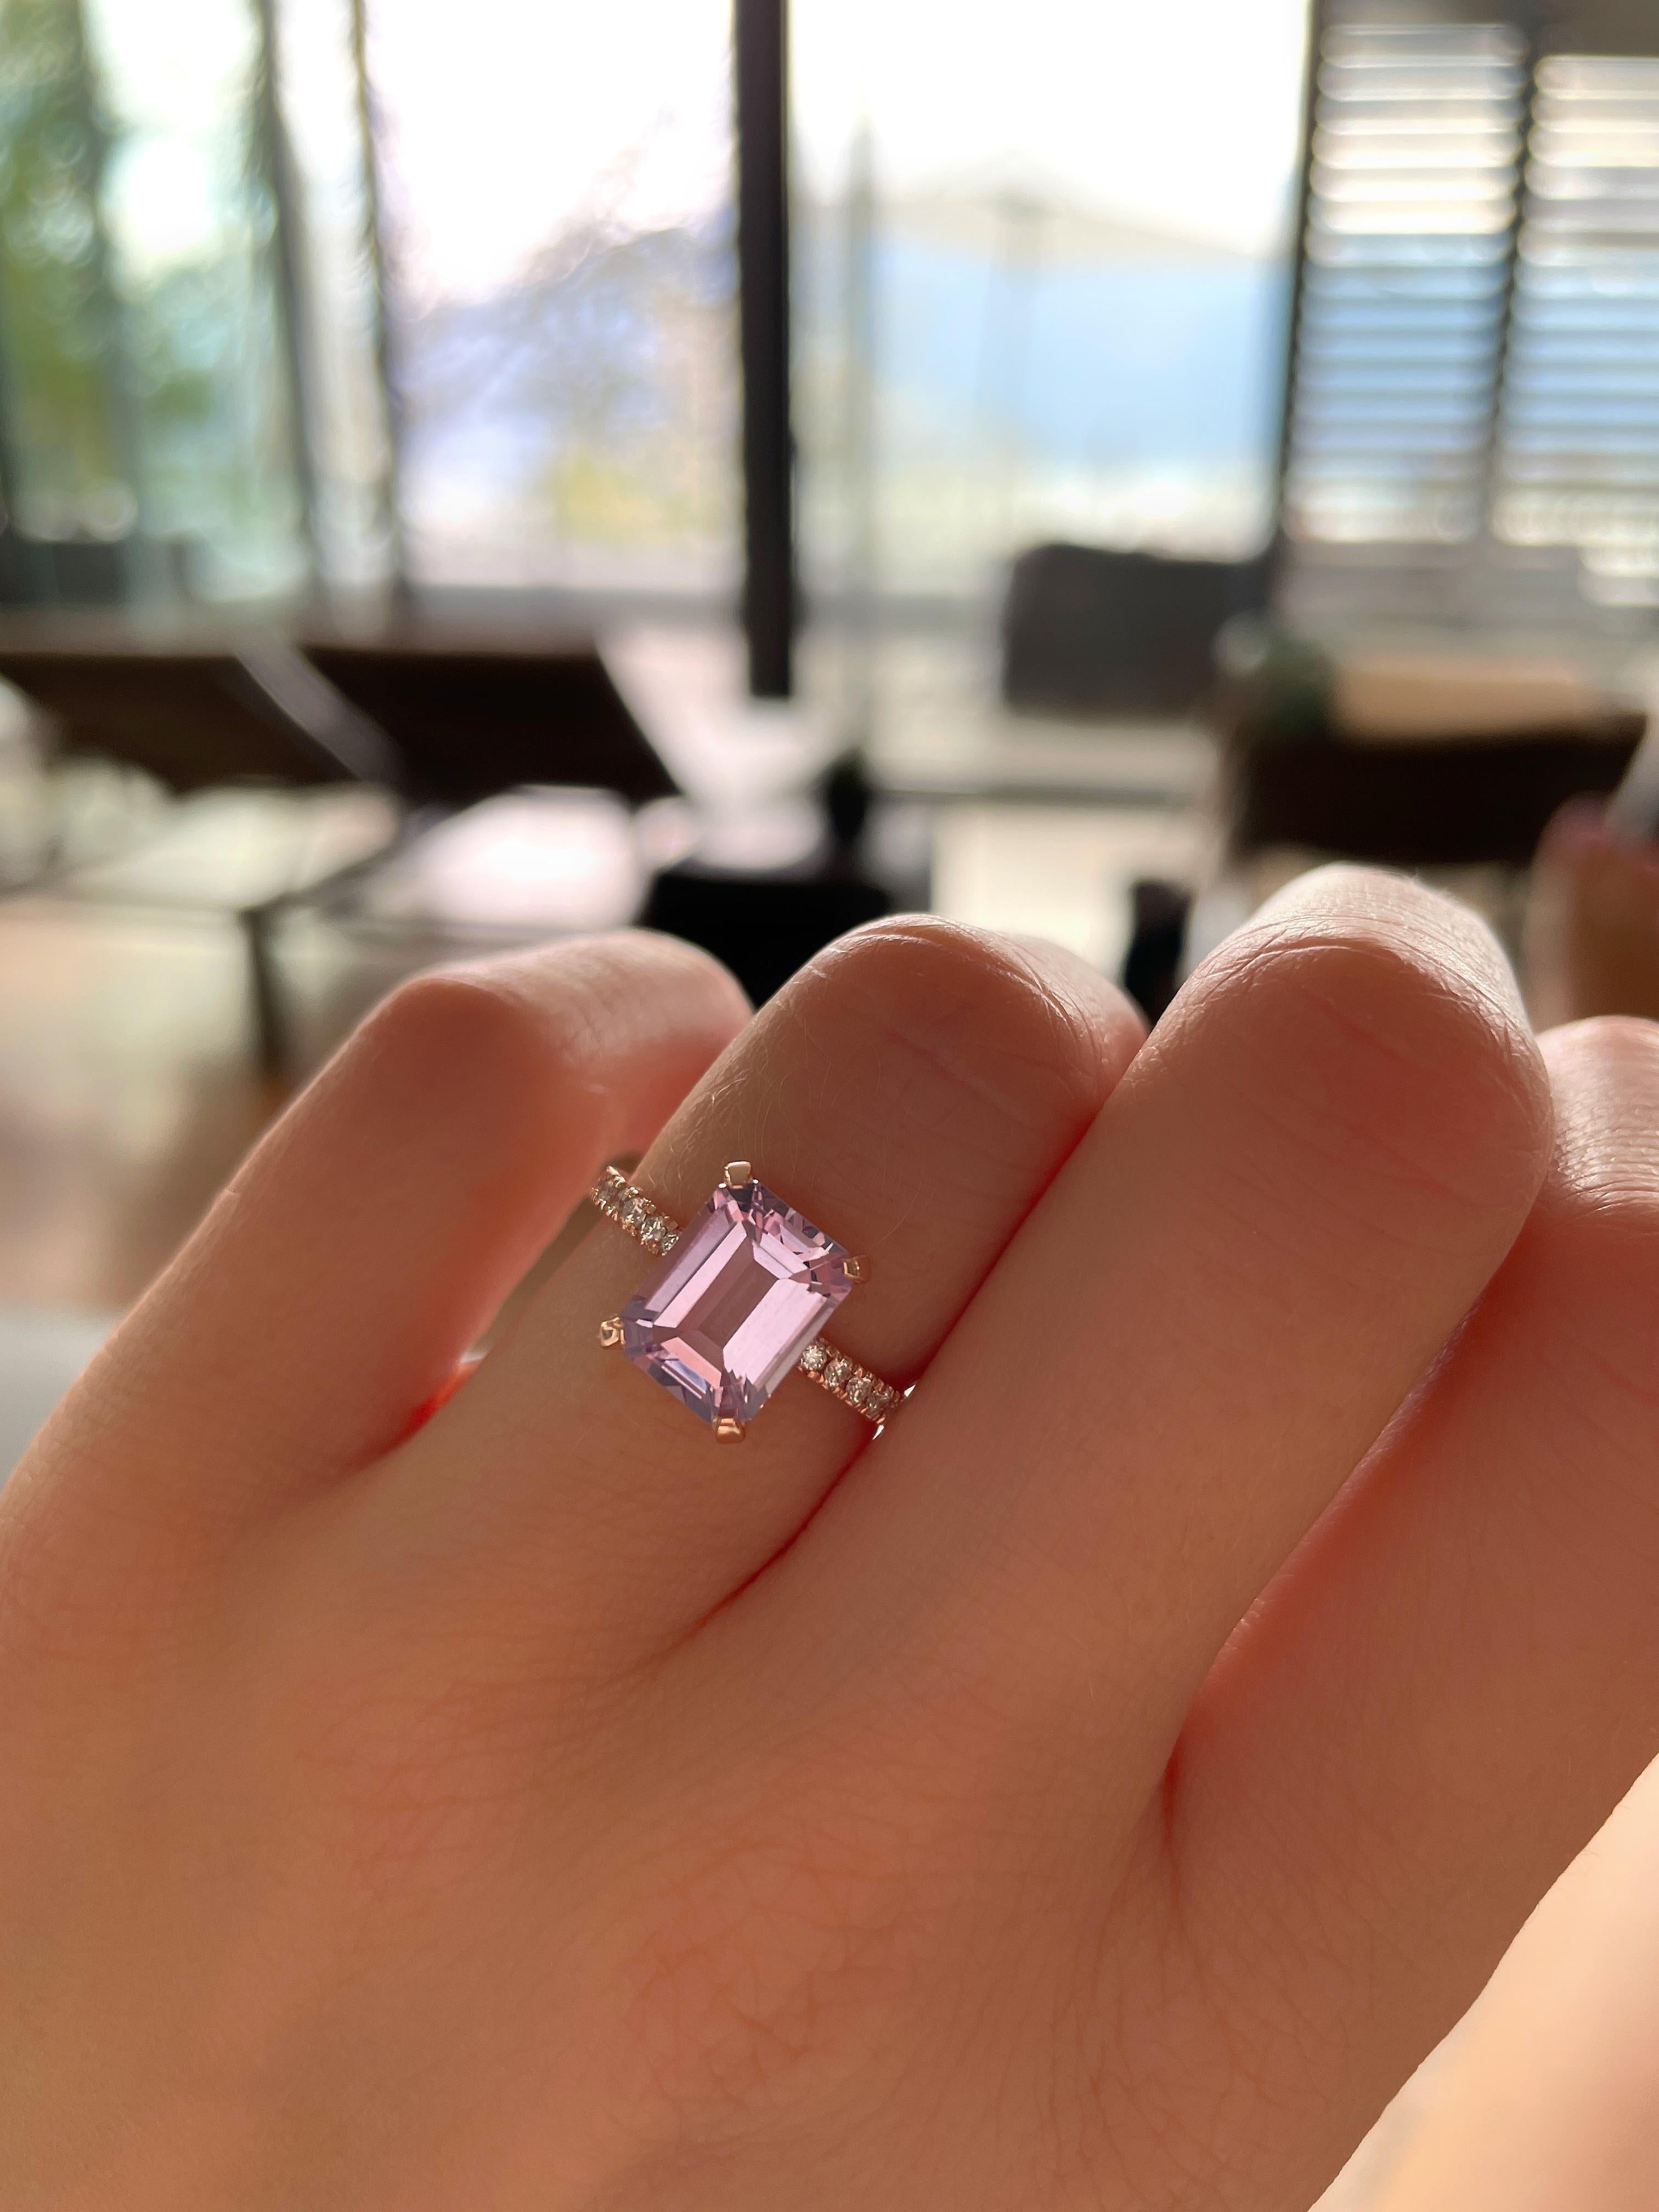 This pink amethyst and diamond ring set in 18K recycled rose gold is a romantic dream. Nestled in a bale of 24 diamonds, with pave set white diamonds on the band as well as diamonds on the prongs, this beauty sparkles in every direction and angle.